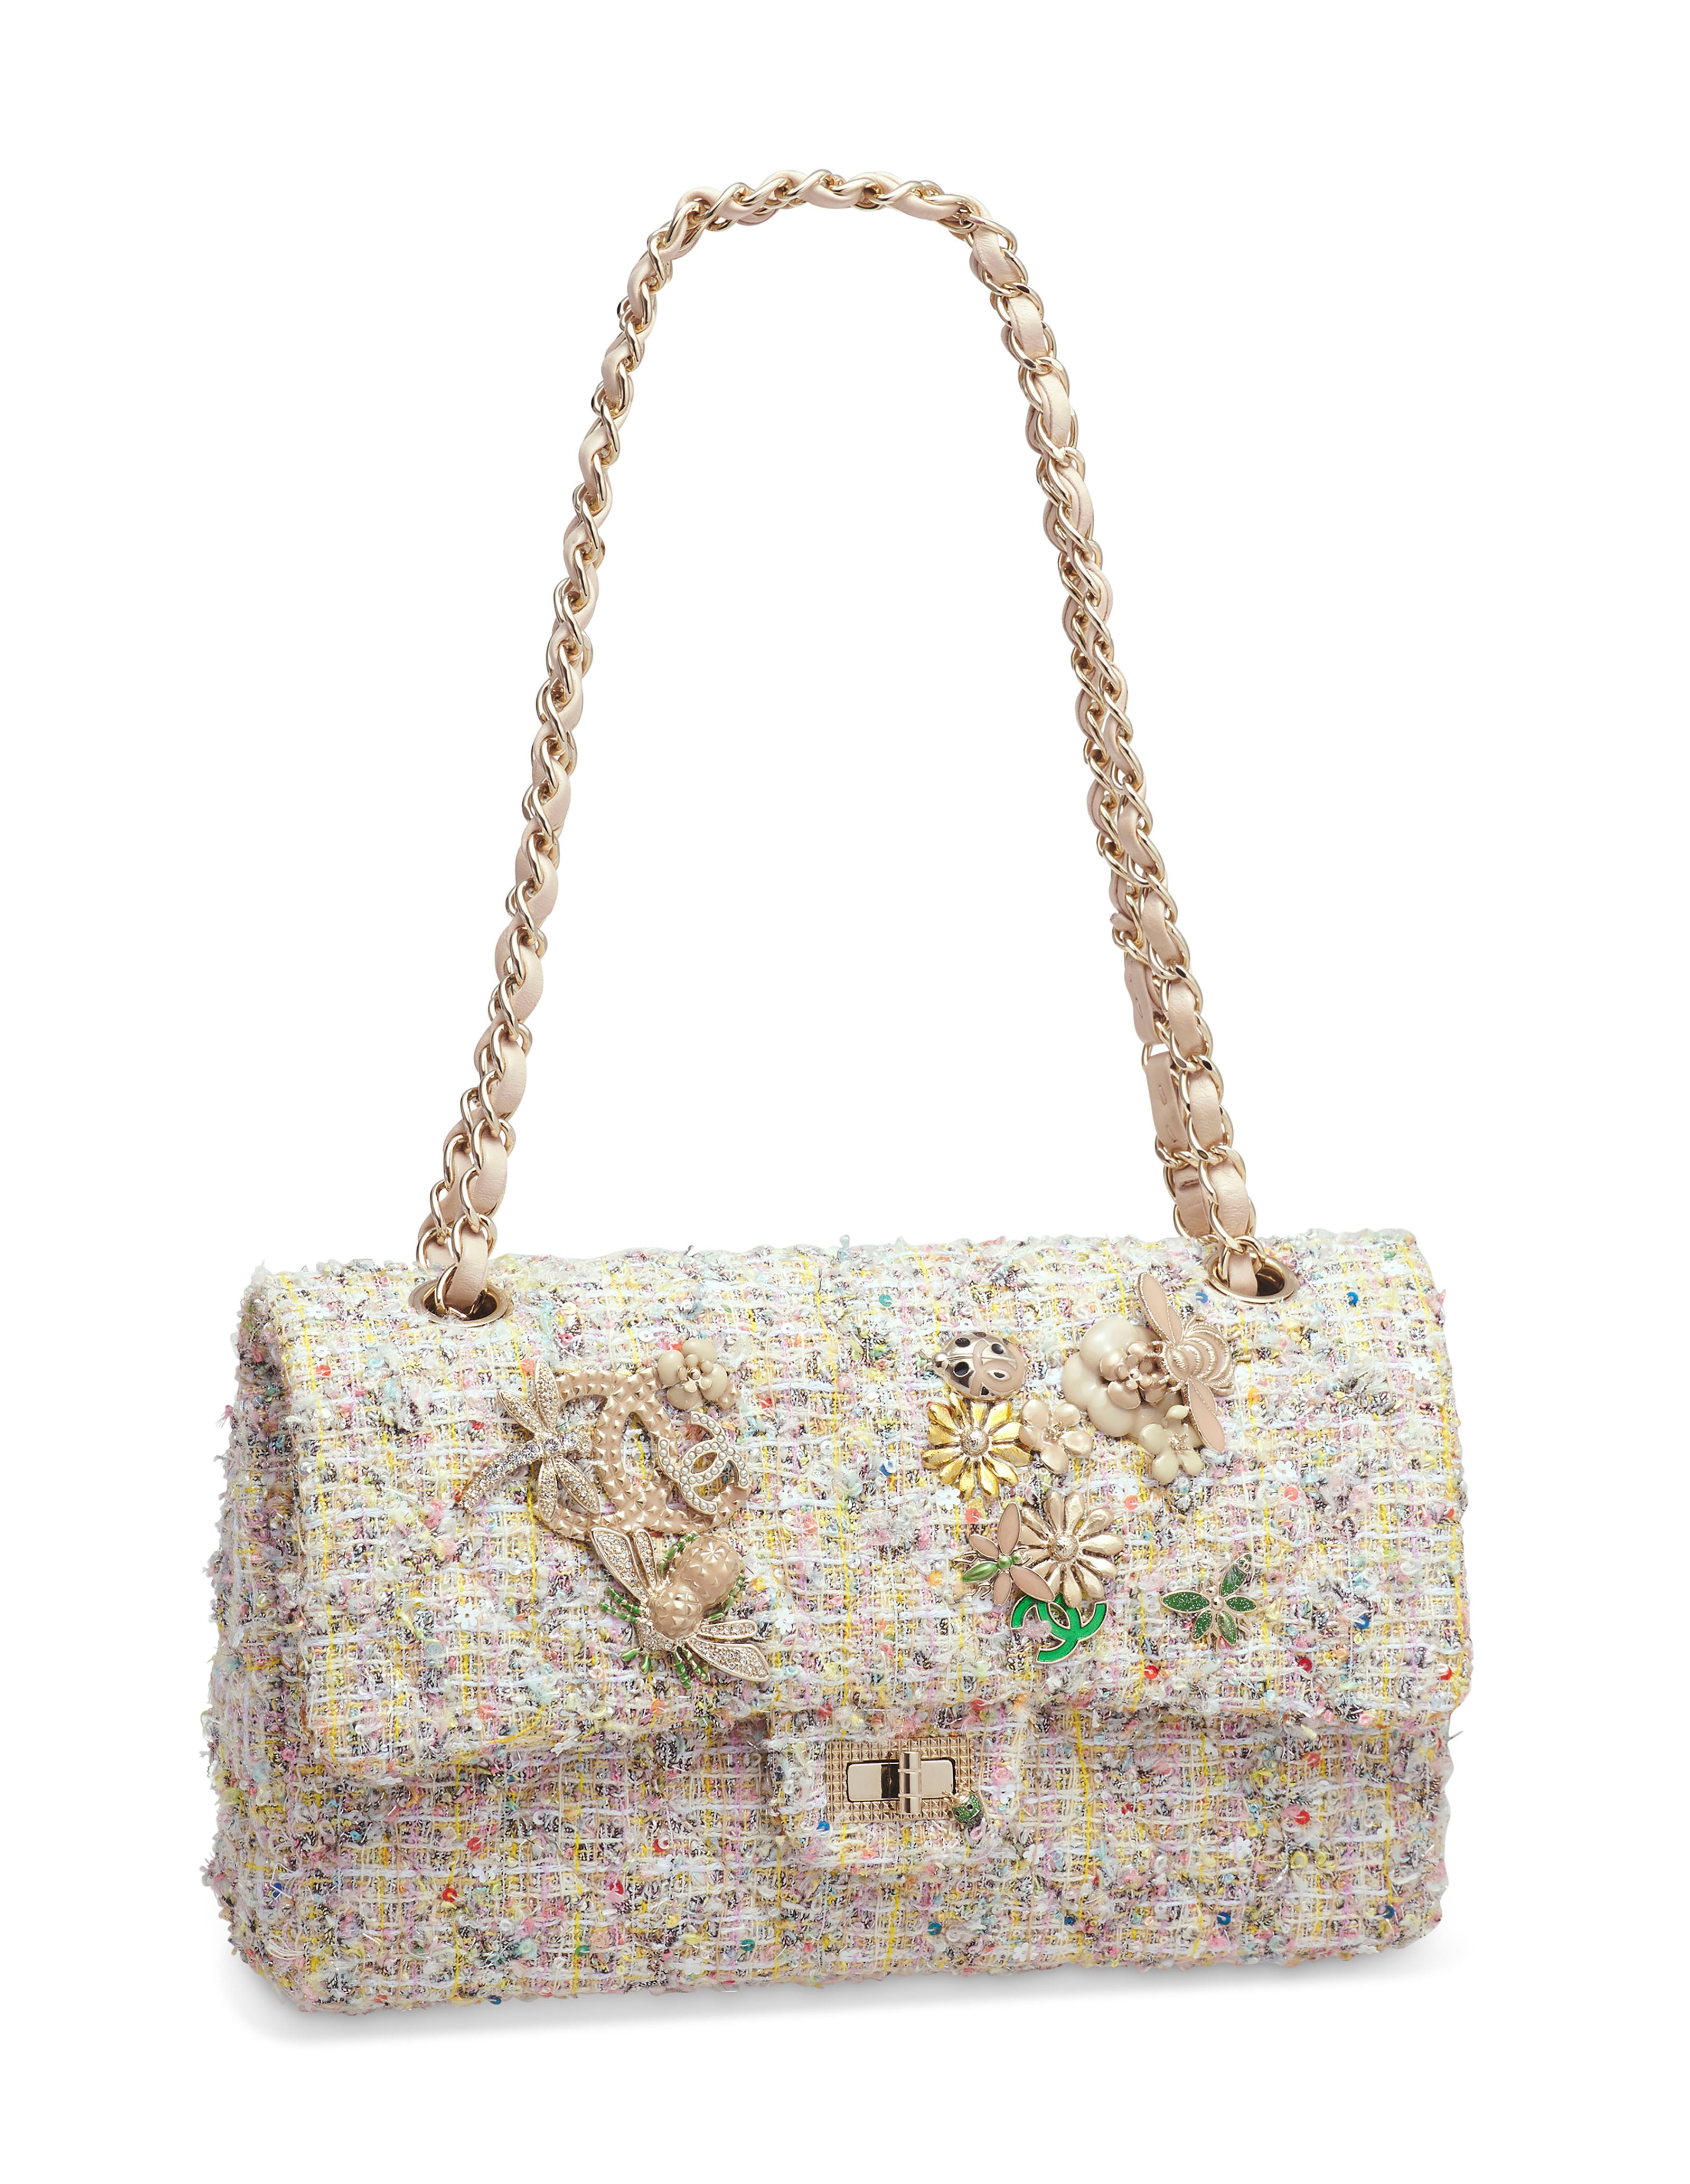 Limited Edition Chanel Garden Party 2.55 Reissue Tweed Classic